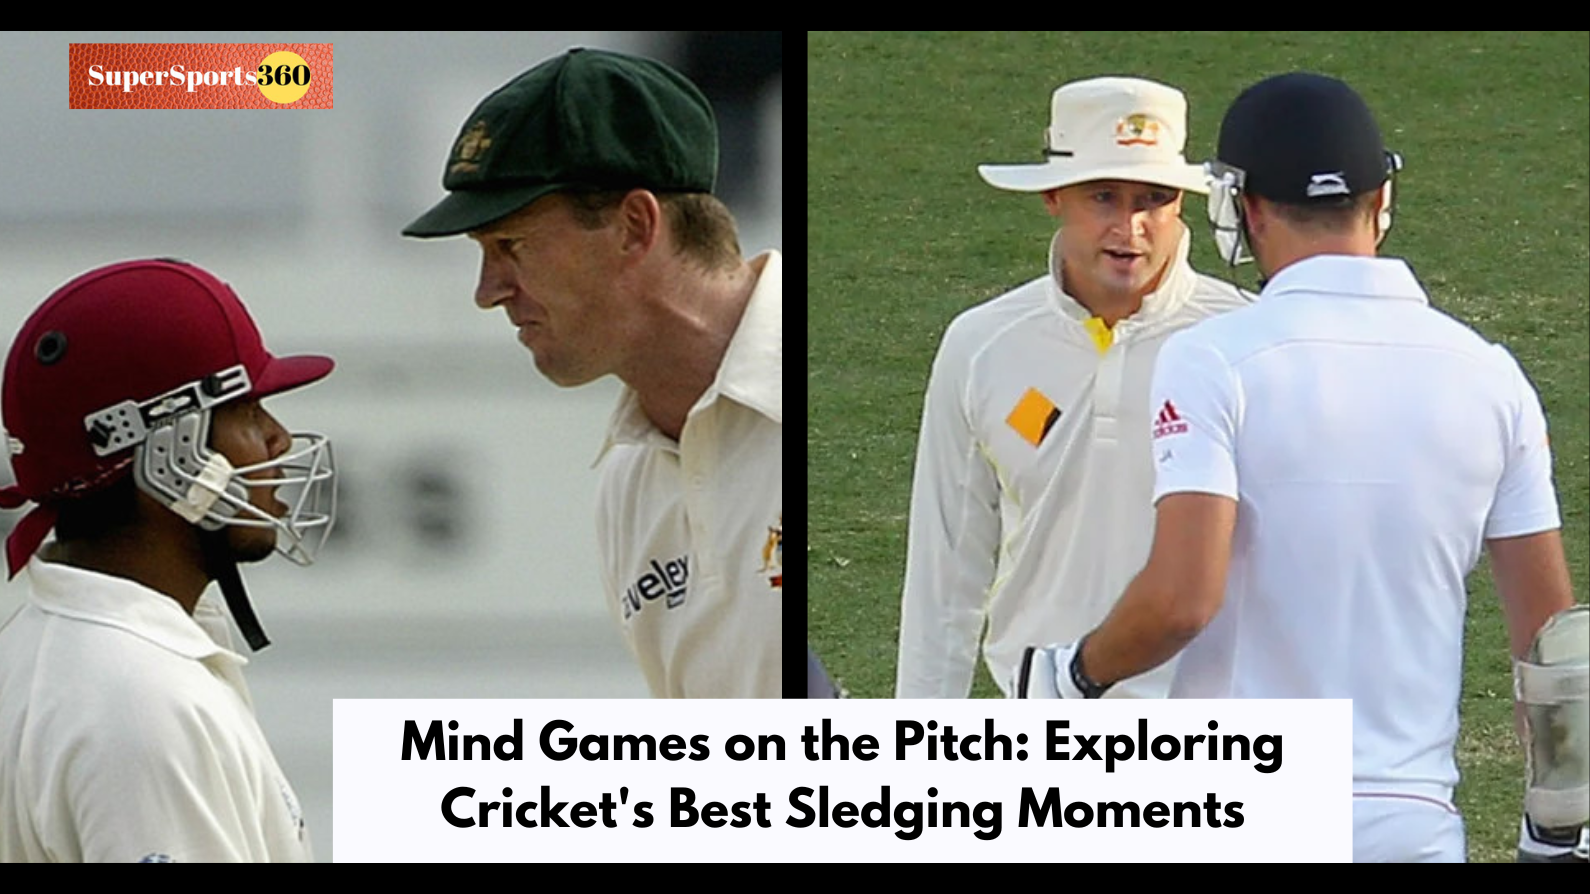 Mind Games on the Pitch: Exploring Cricket's Best Sledging Moments